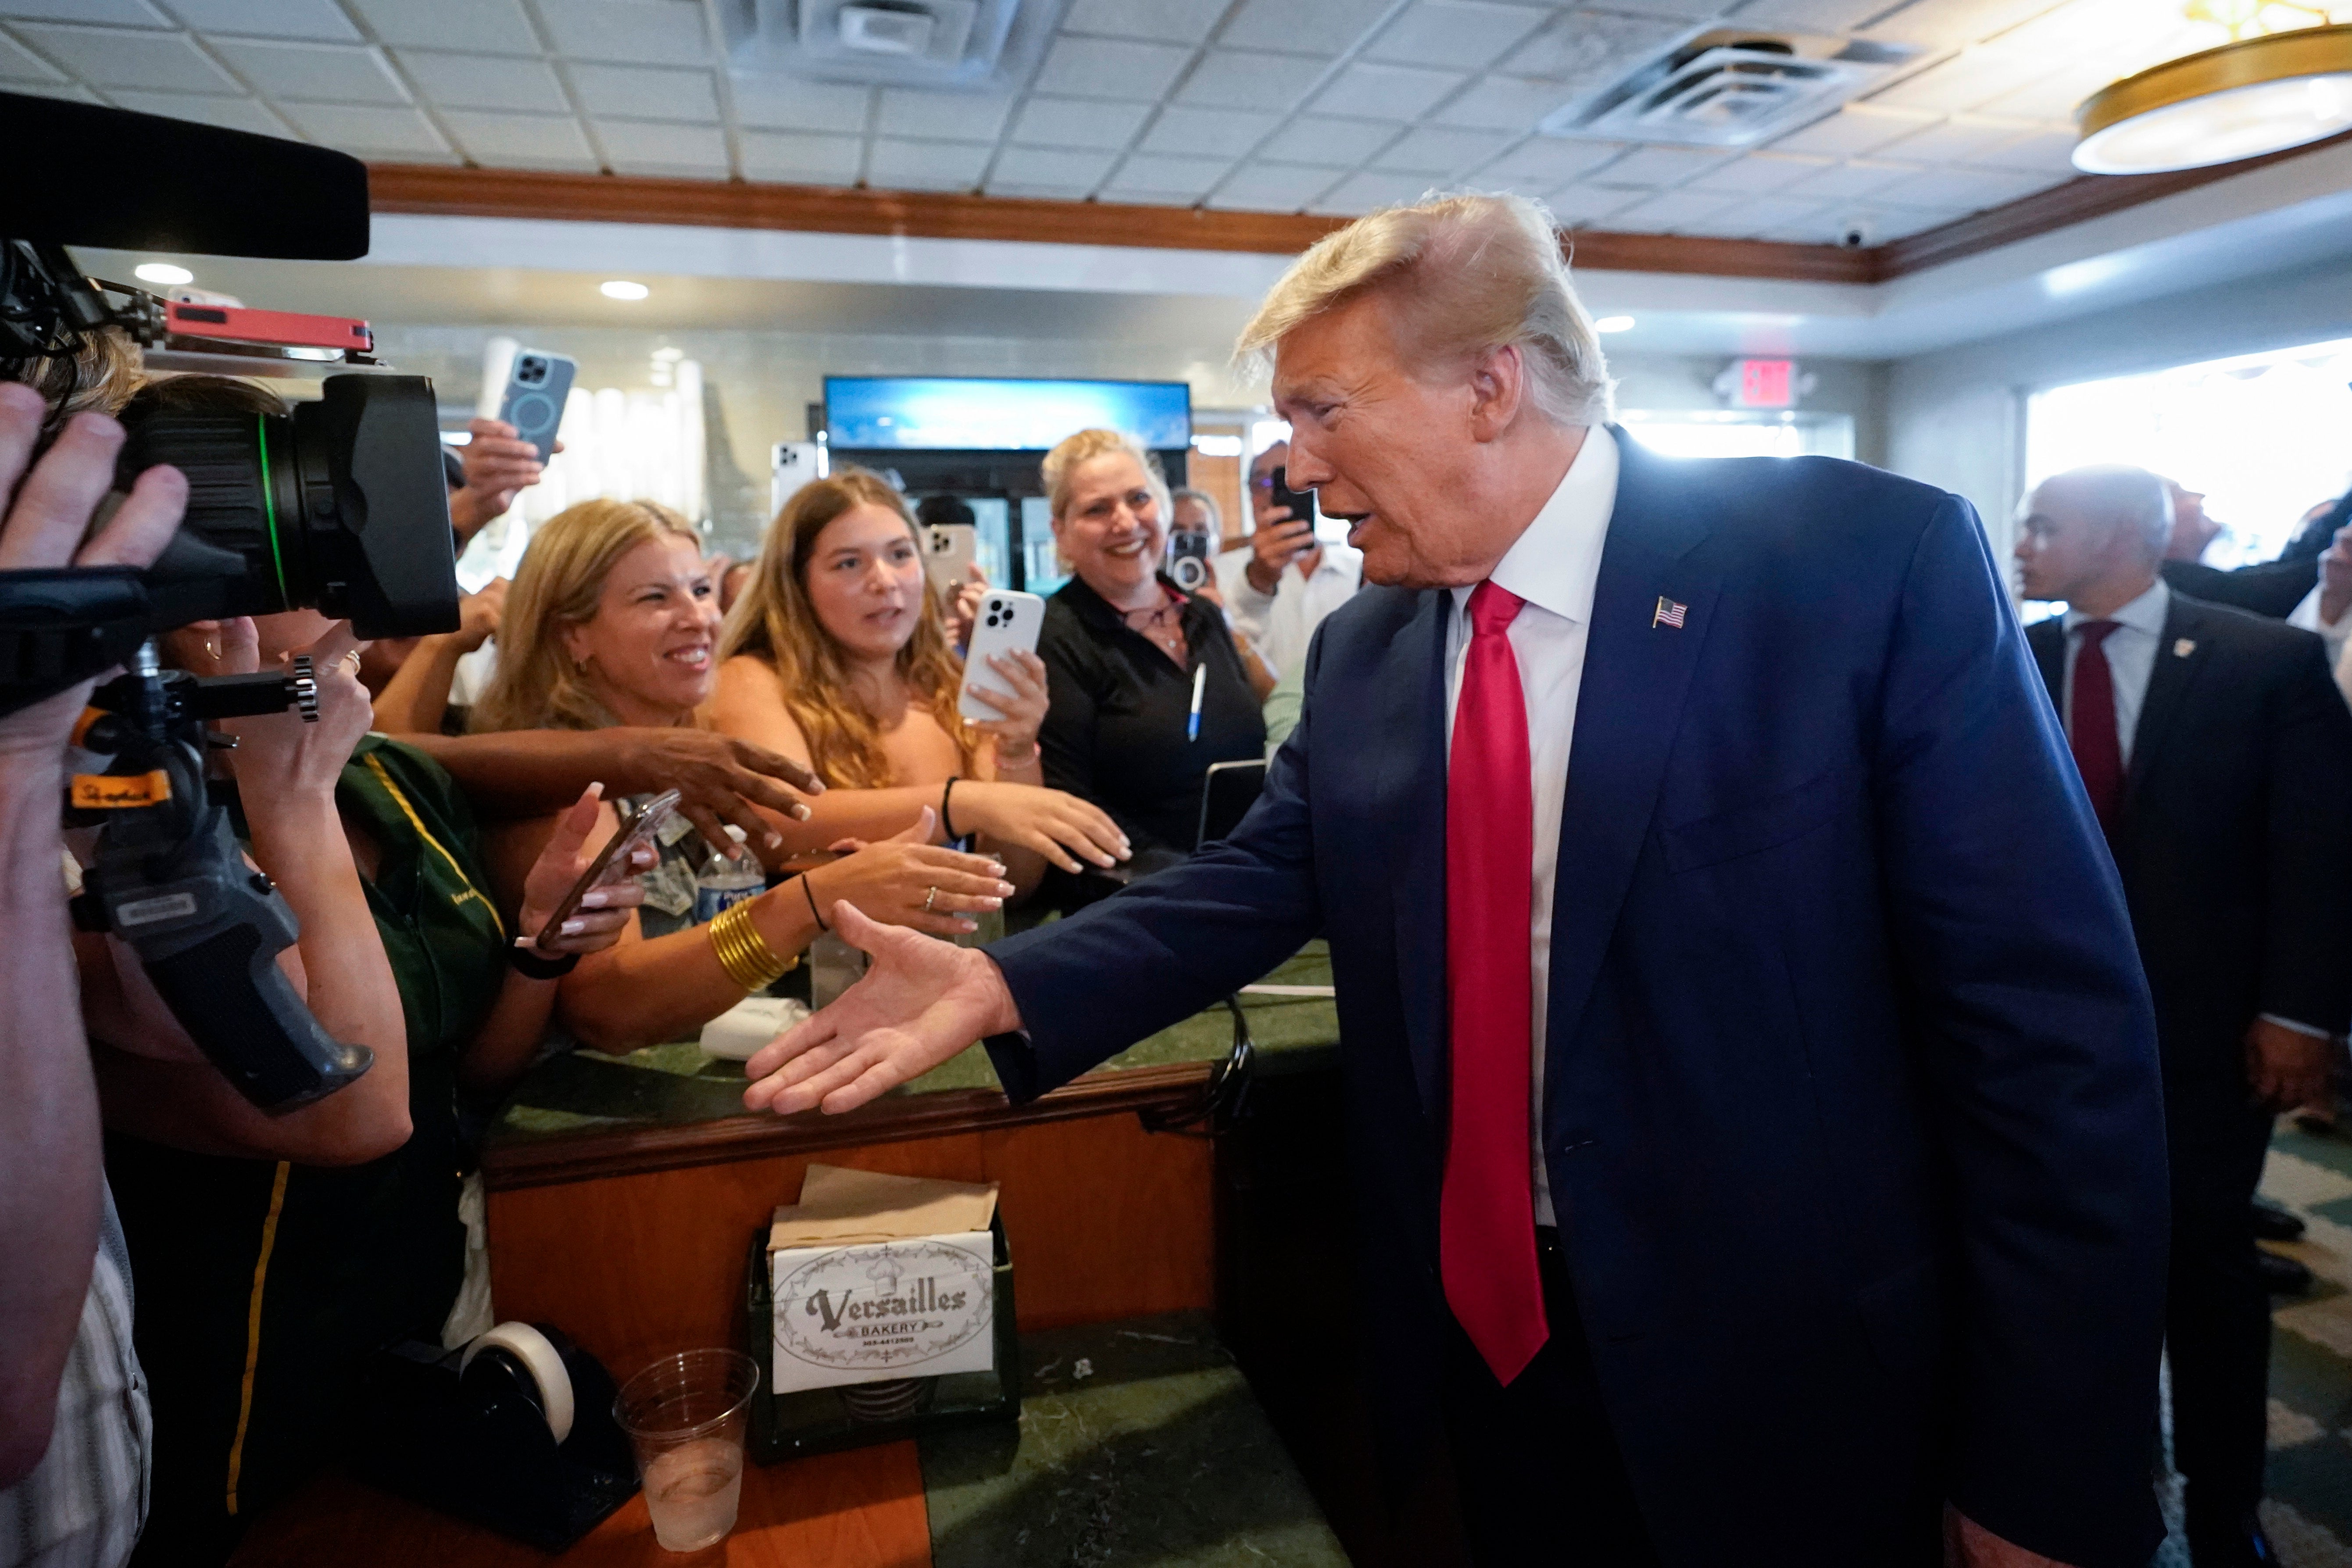 Trump greets supporters in a cafe in Miami following his arraignment